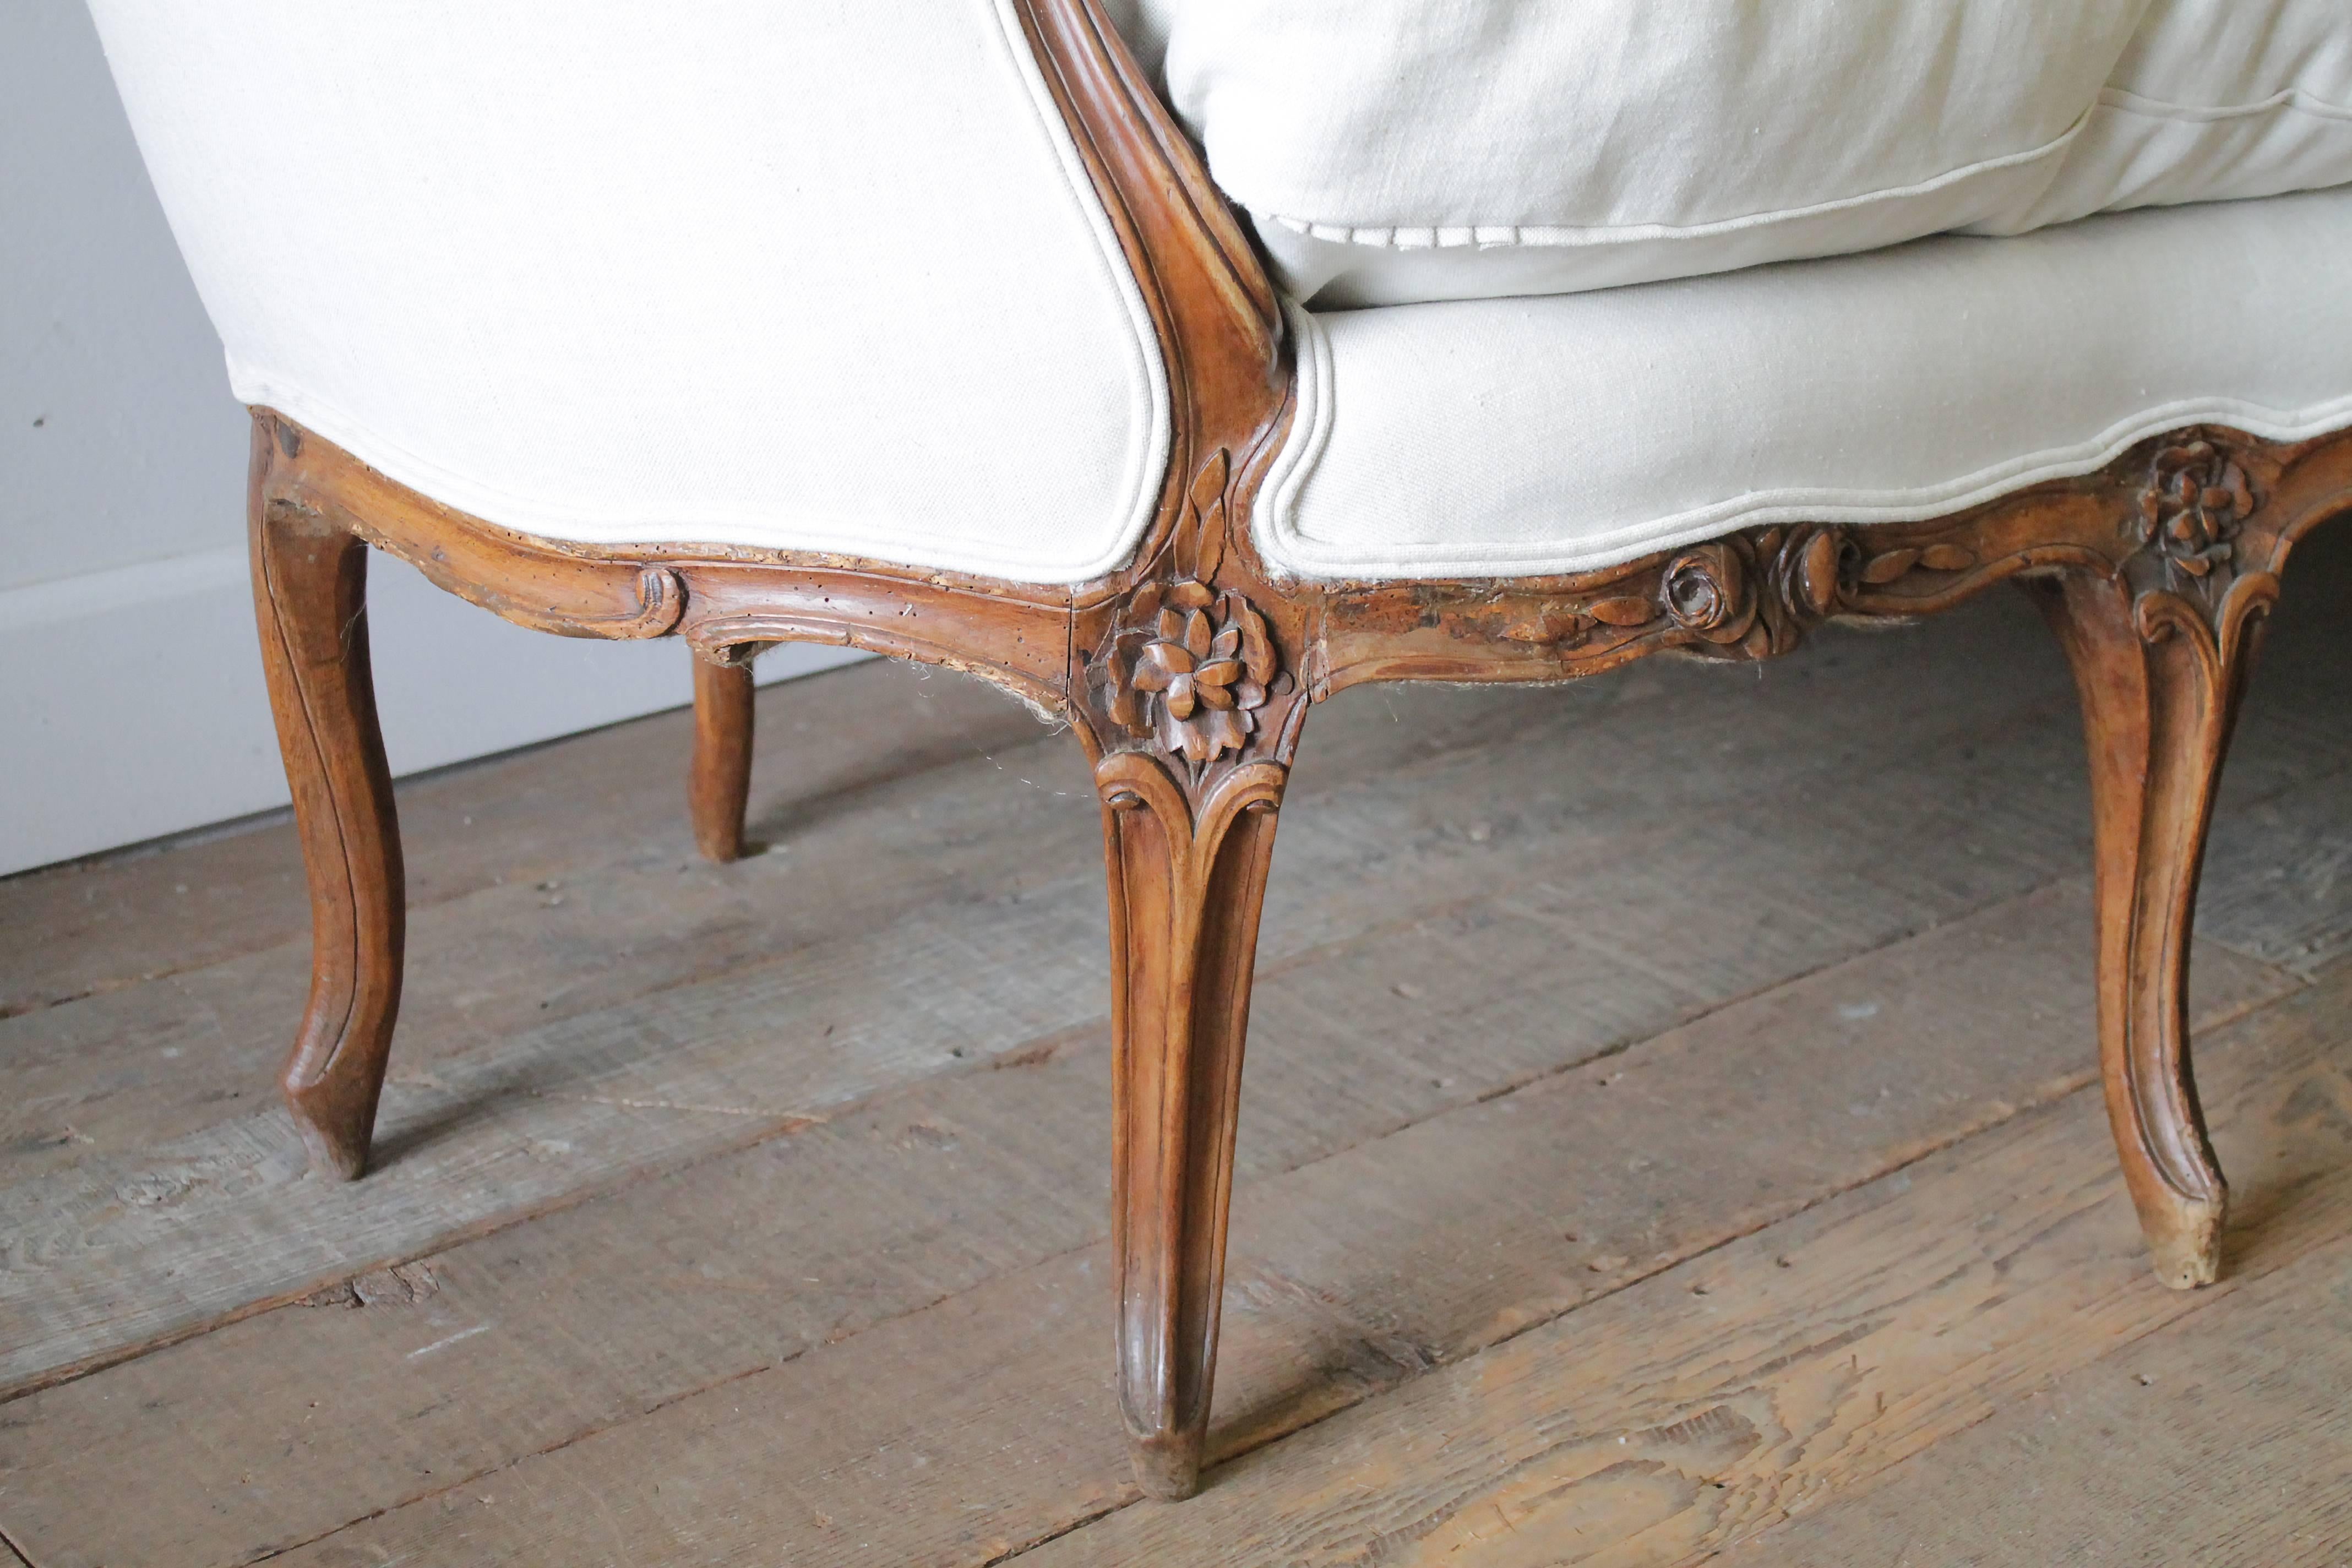 Hand-Carved 19th Century Carved Walnut Louis XV Style French Sofa Upholstered Belgian Linen